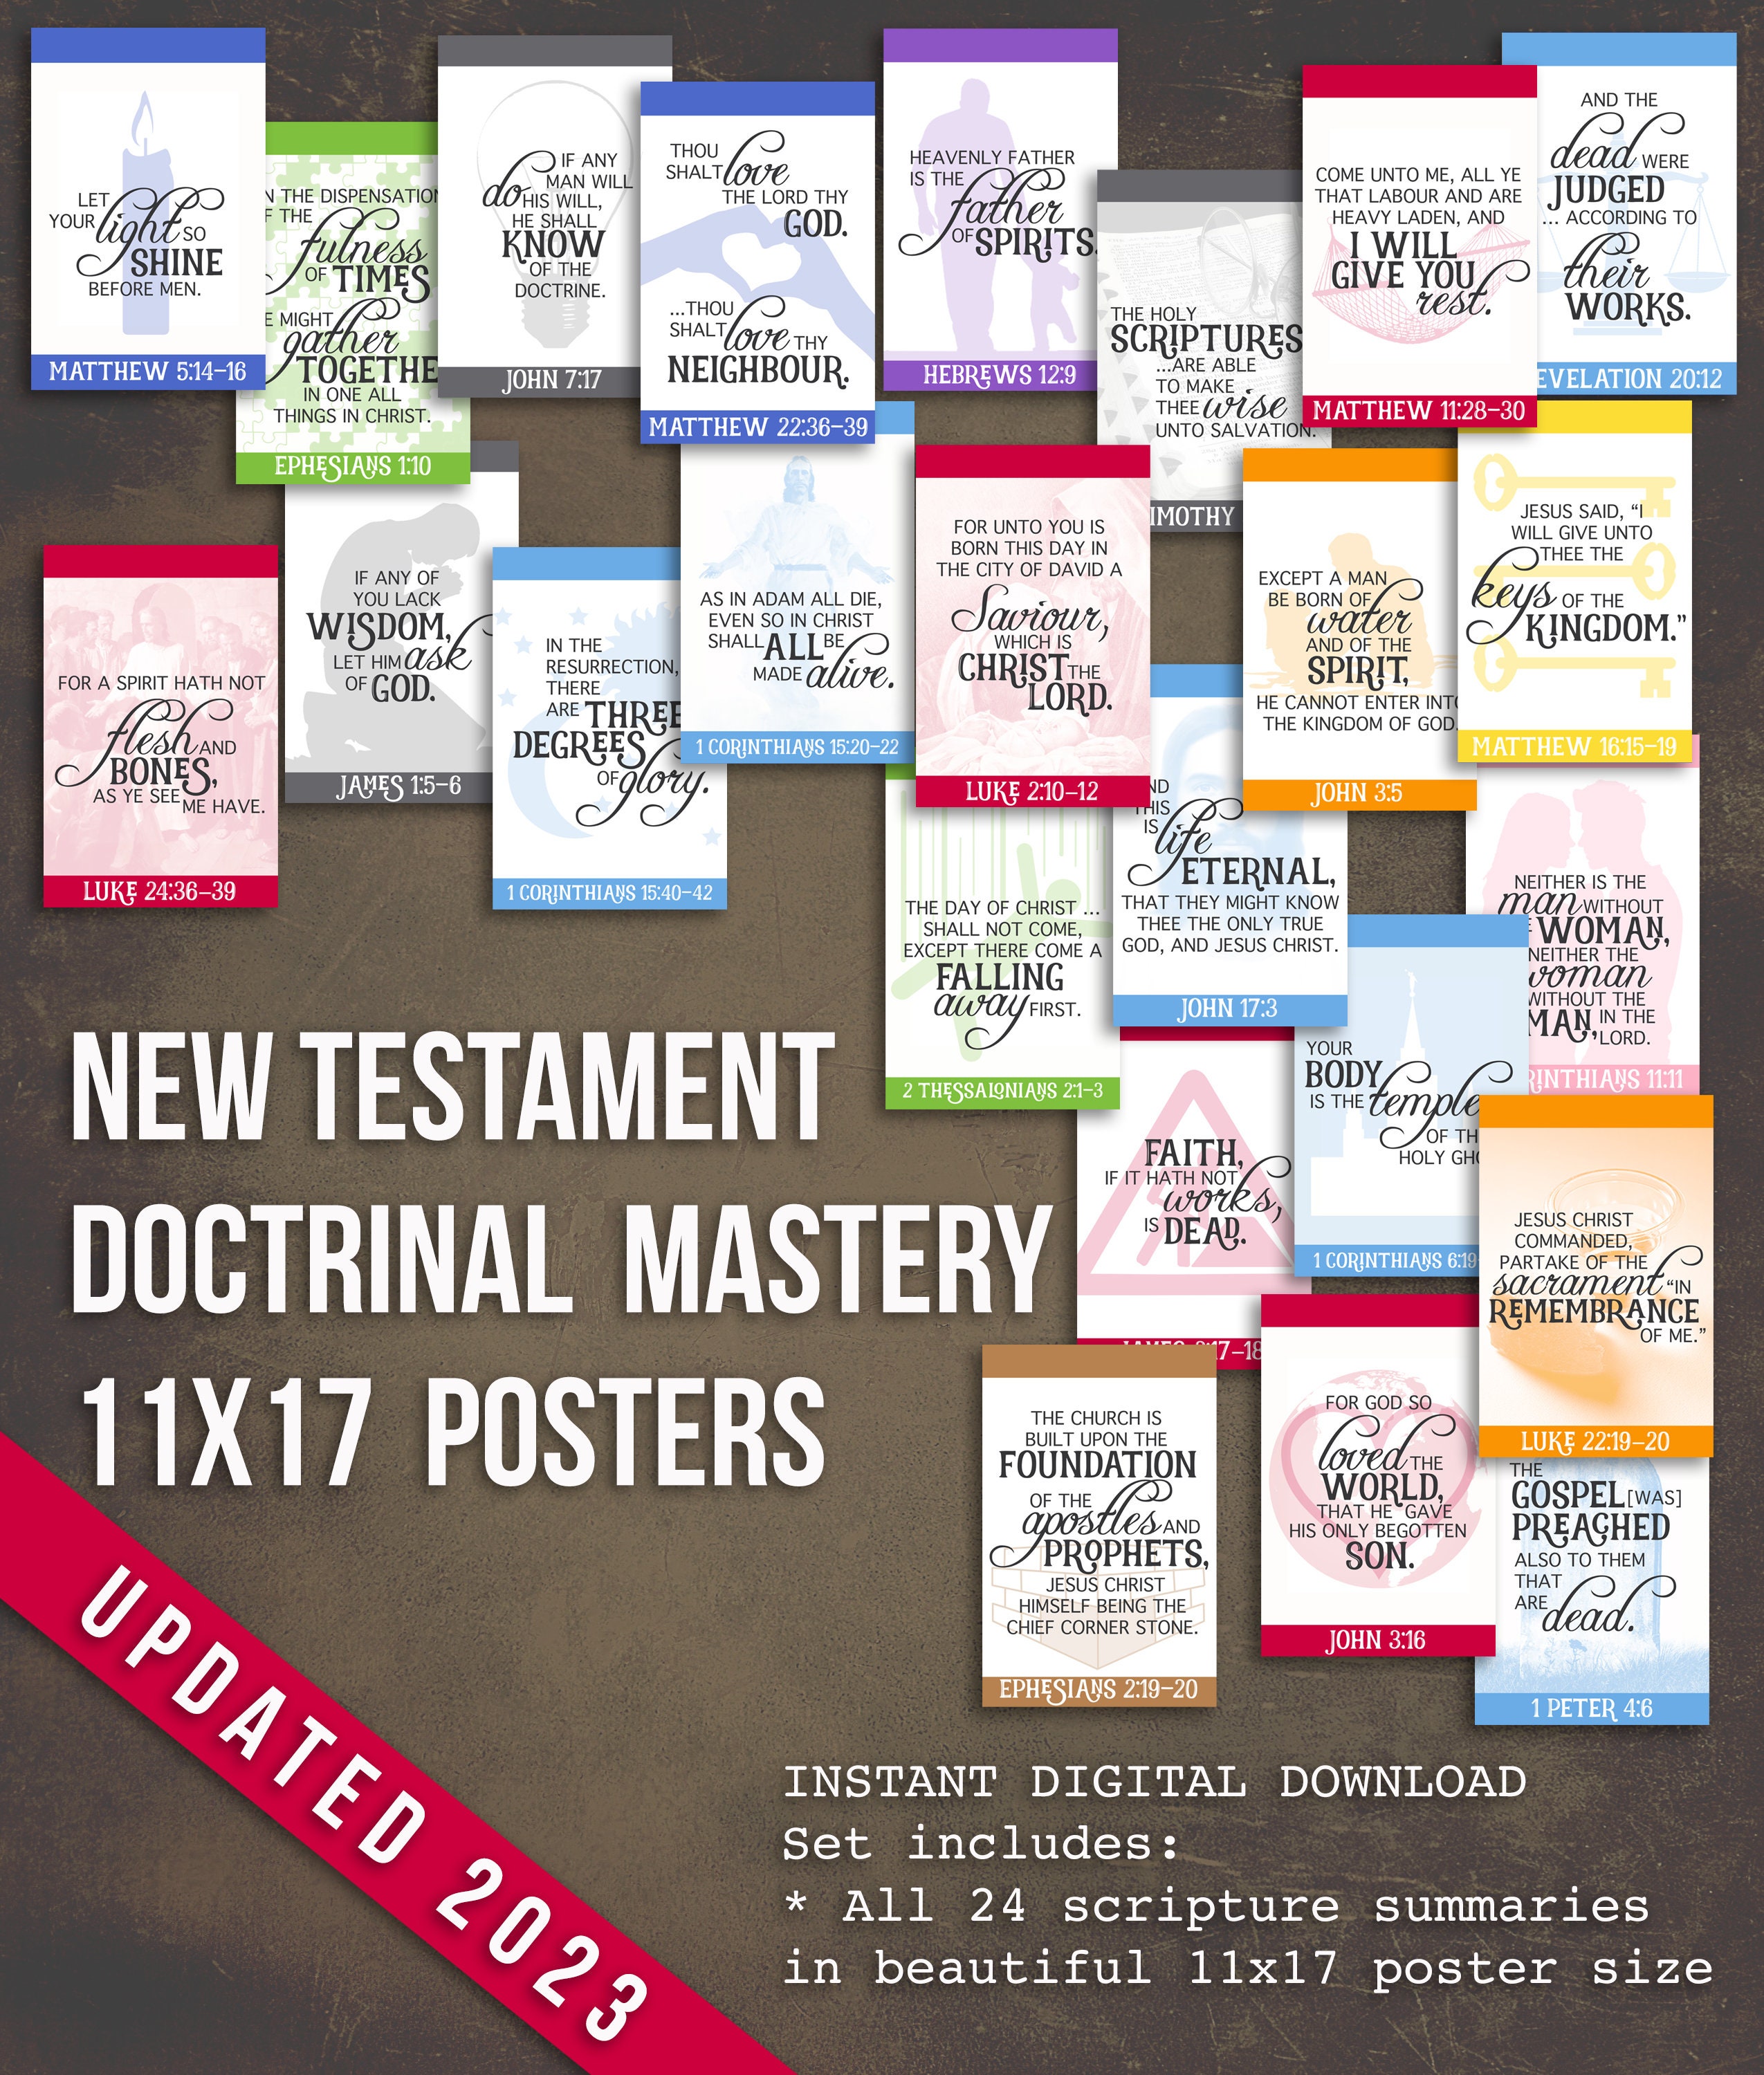 11x17 New Testament Doctrinal Mastery Posters for LDS Seminarydigital